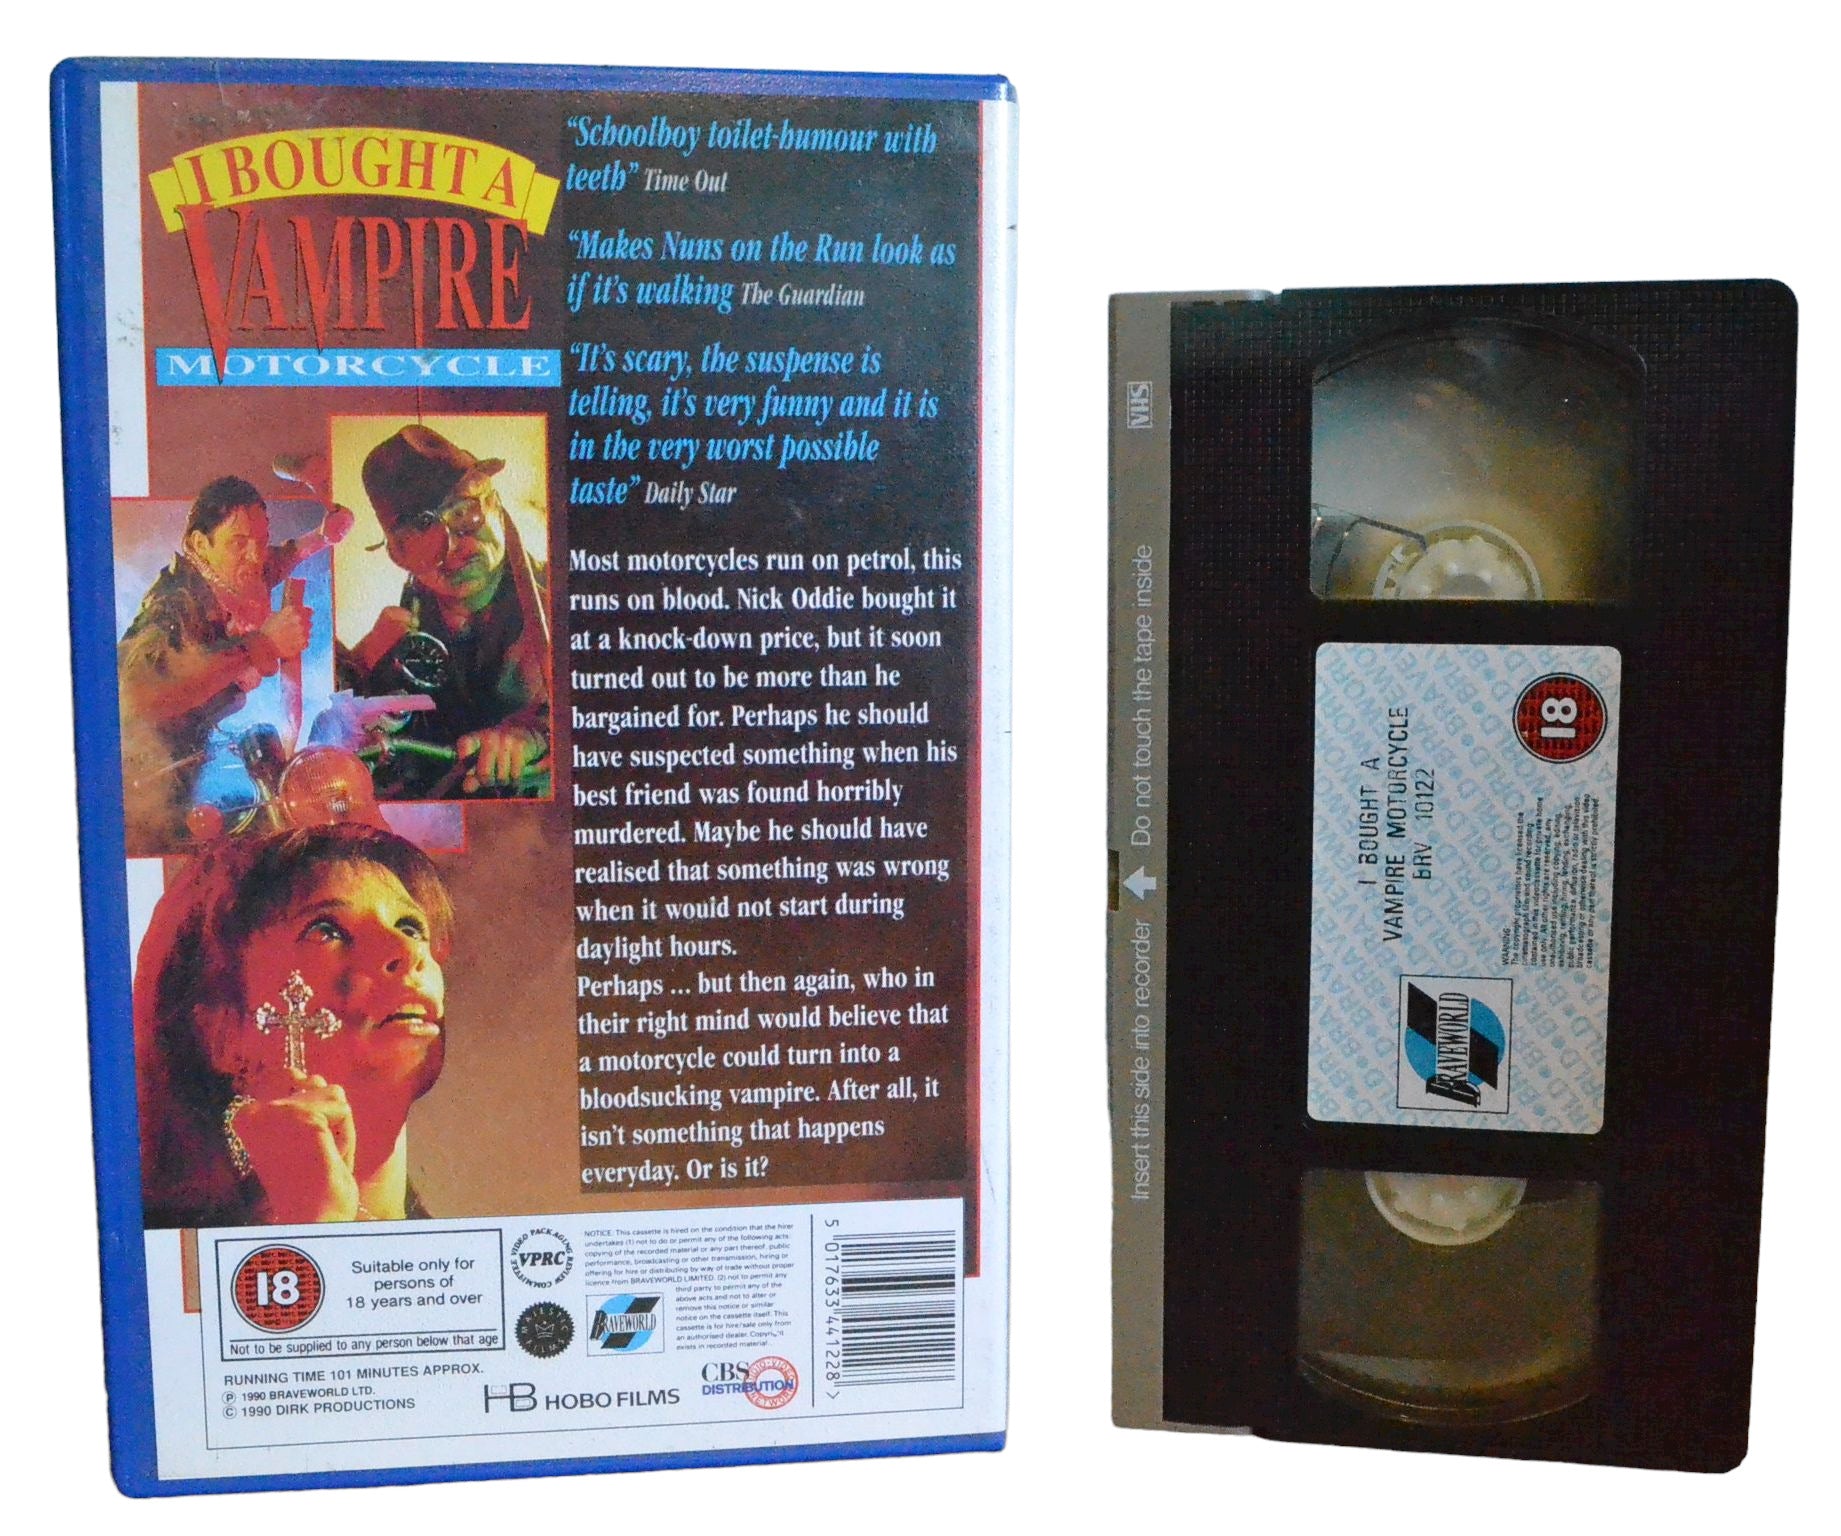 I Bought A Vampire Motorcycle - Neil Morrissey - Brave World - Large Box - PAL - VHS-